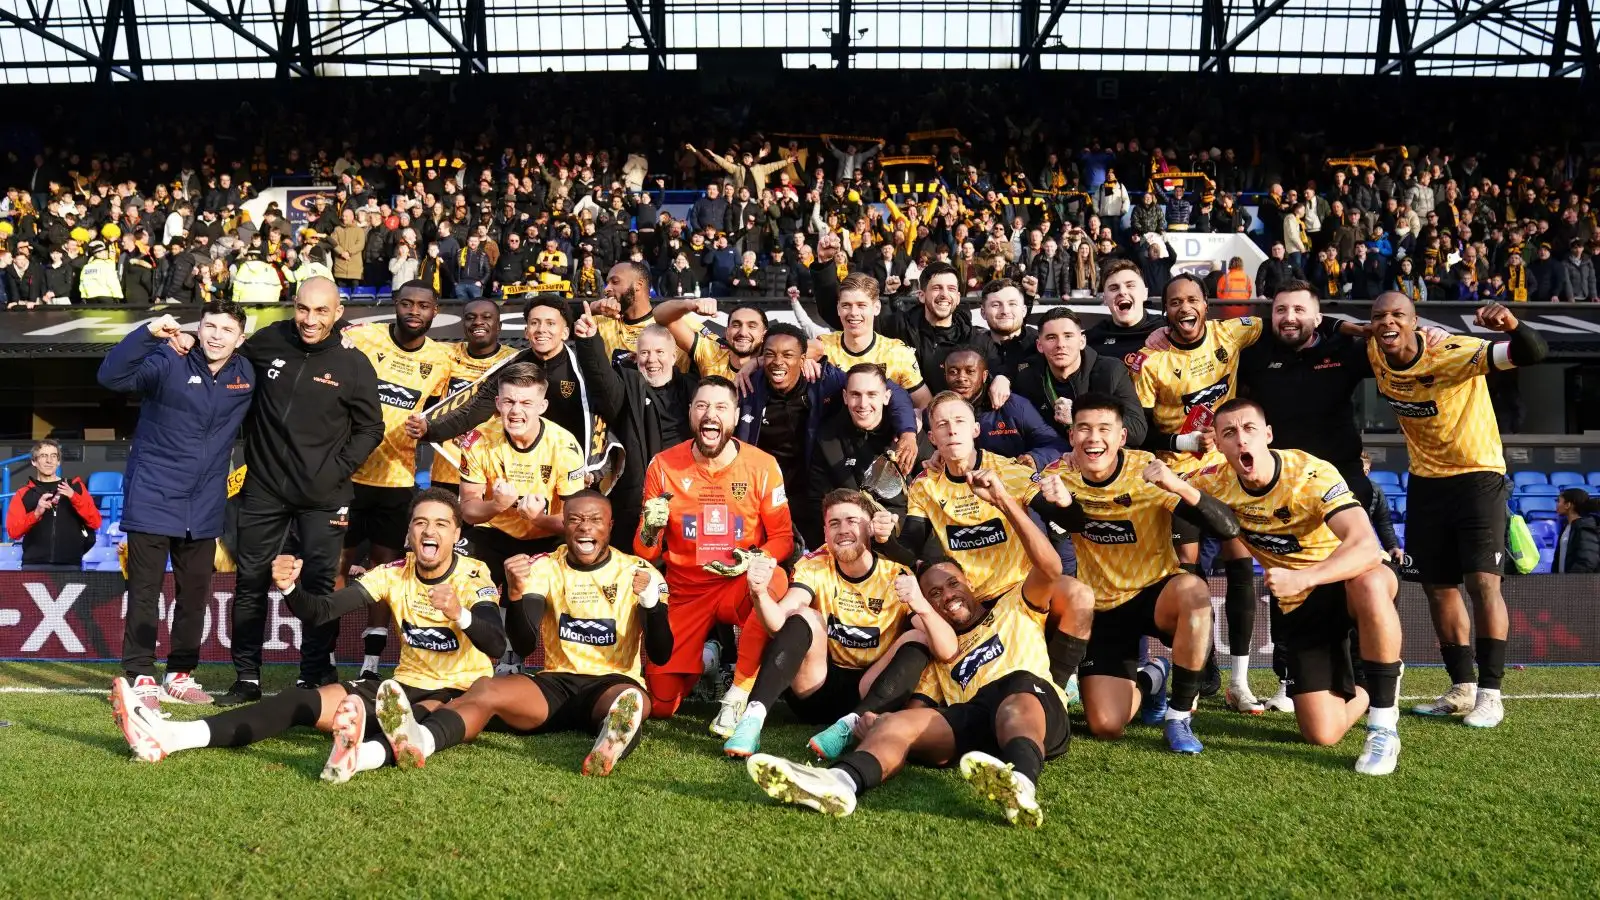 Maidstone gamers rejoice their historic win over Ipswich.